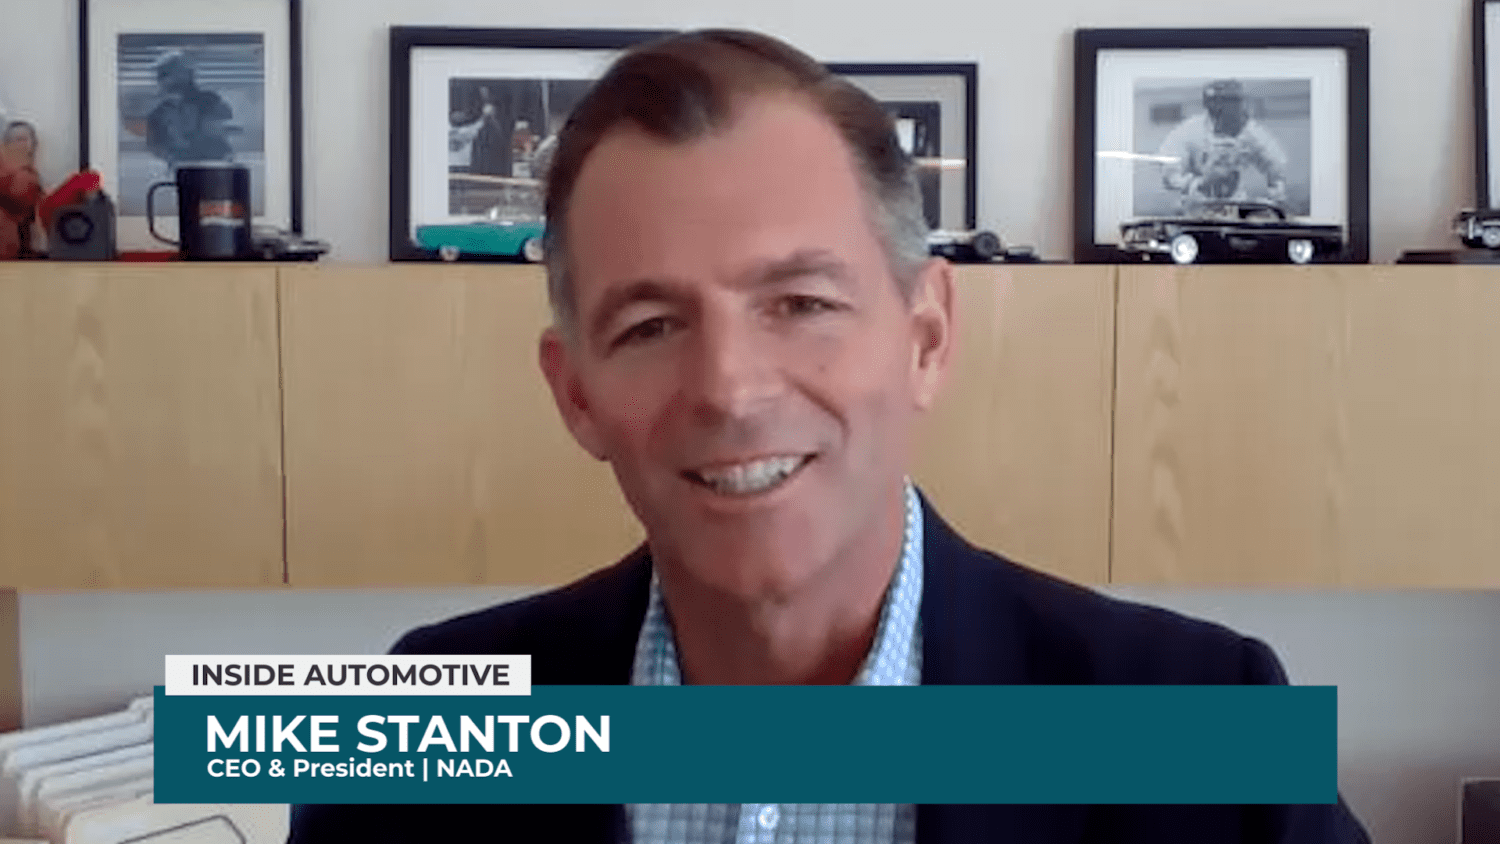 Mike Stanton joins Inside Automotive to discuss how the NADA and its members are working with the government to pursue electrification.